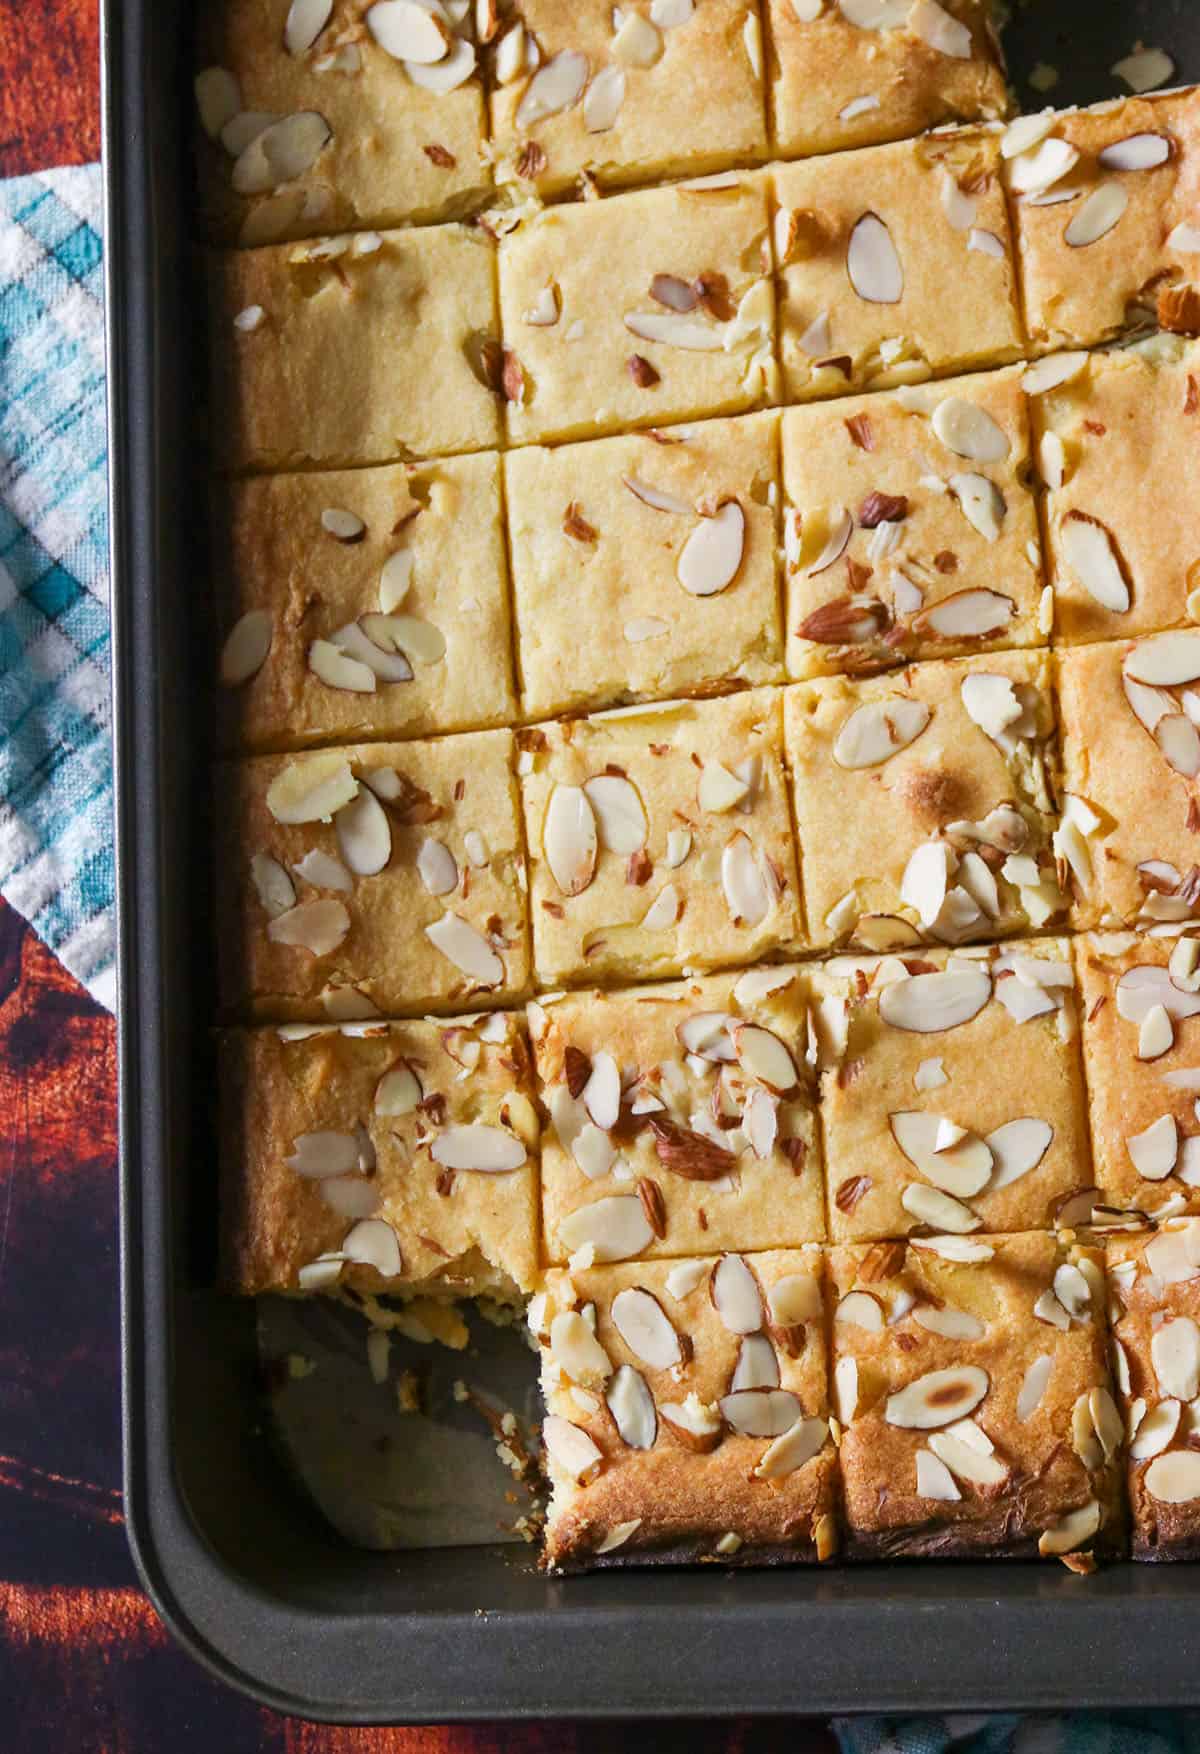 The sliced caramel bars in a baking pan.